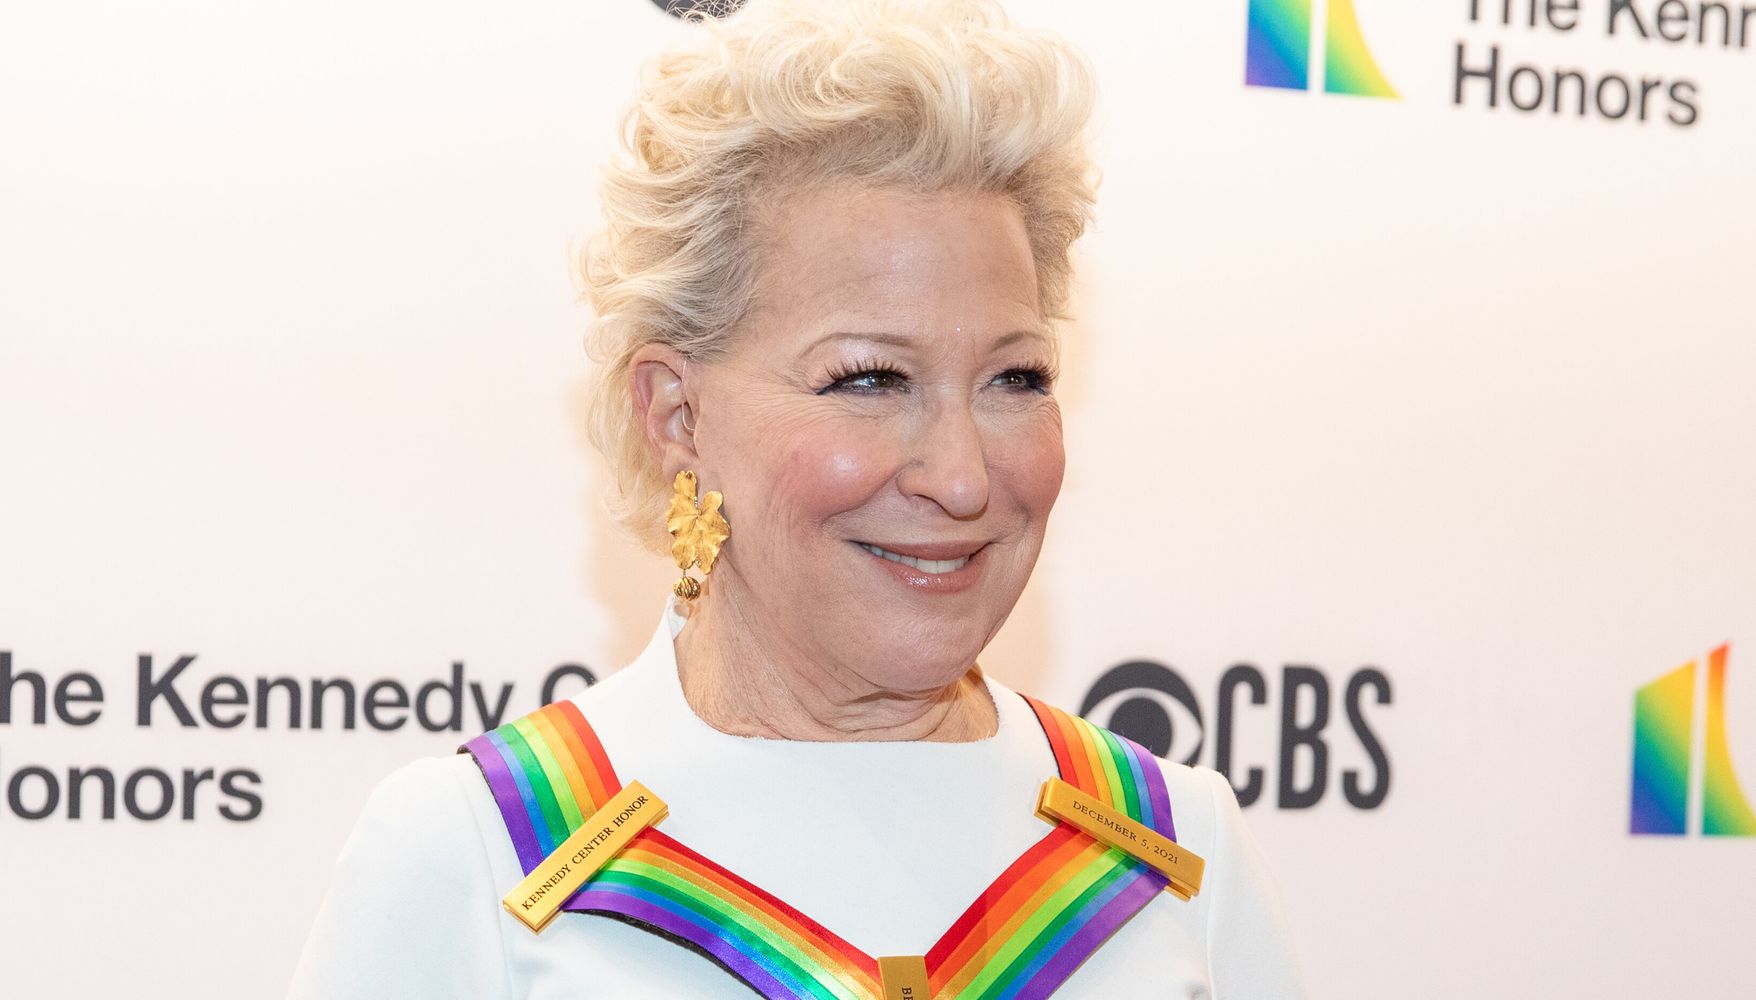 Bette Midler Says She Failed to Intend To Be Transphobic: ‘It Wasn’t About That’